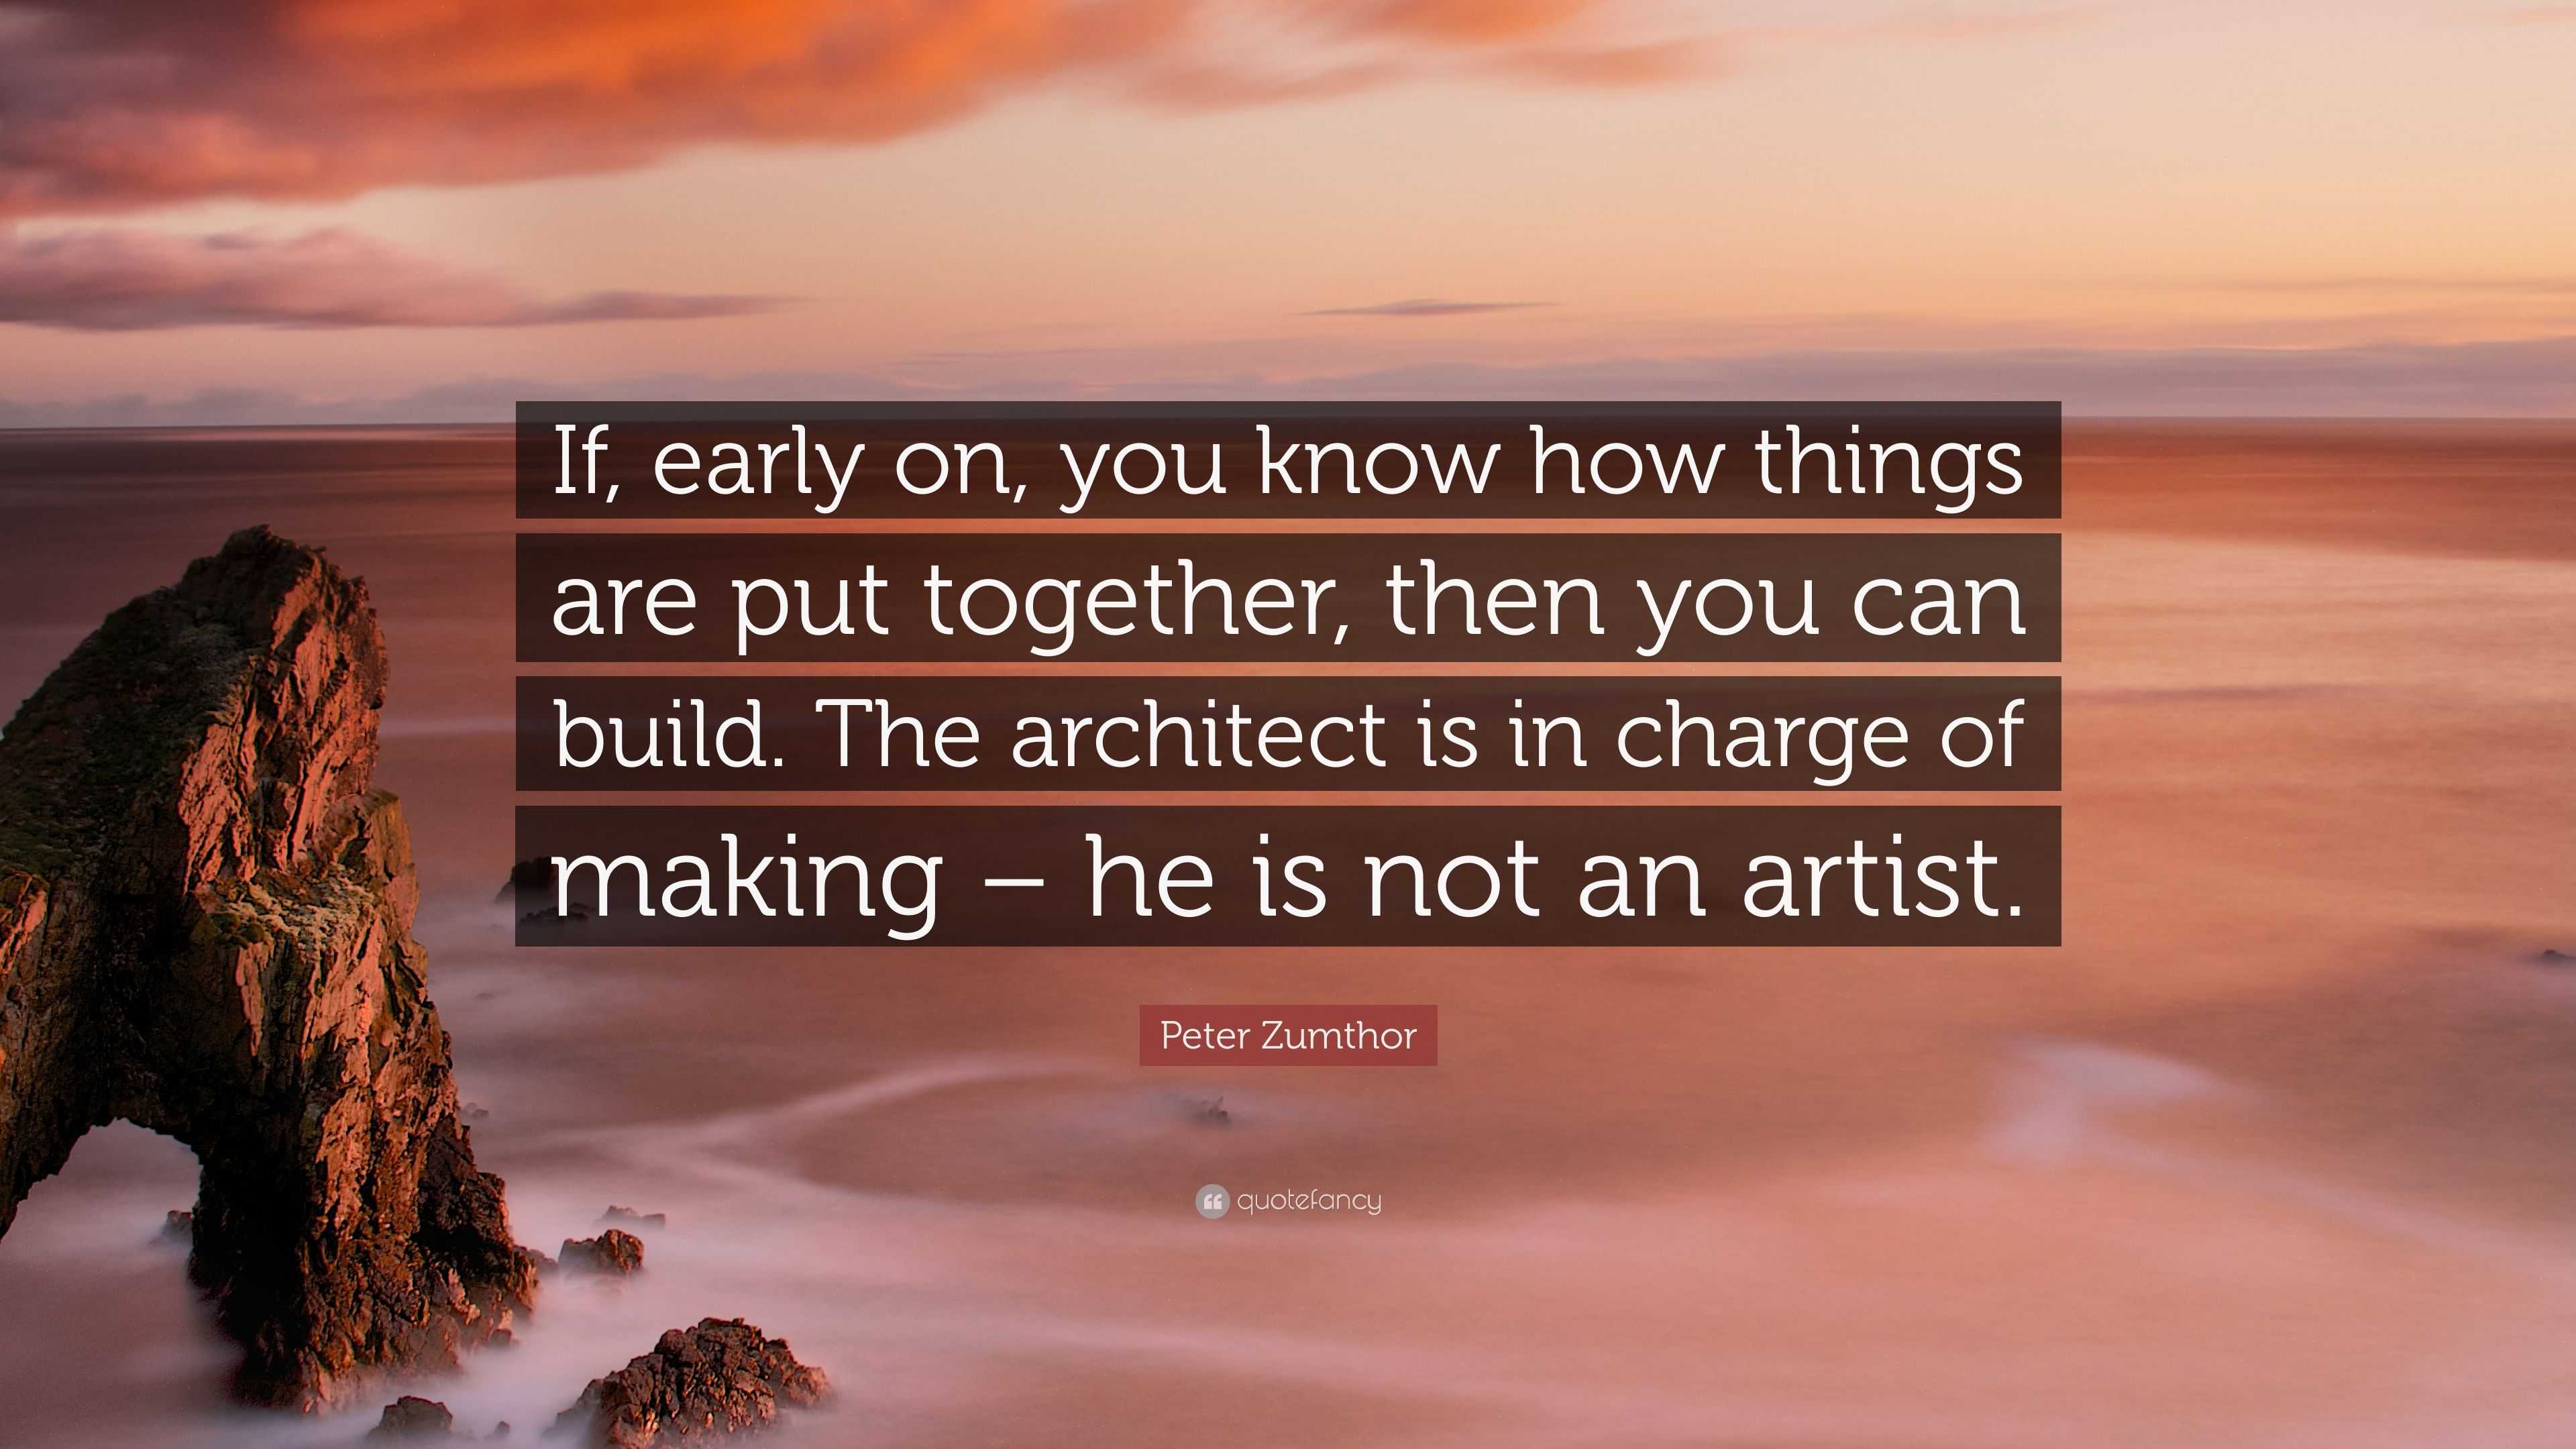 Peter Zumthor Quote: “If, early on, you know how things are put ...